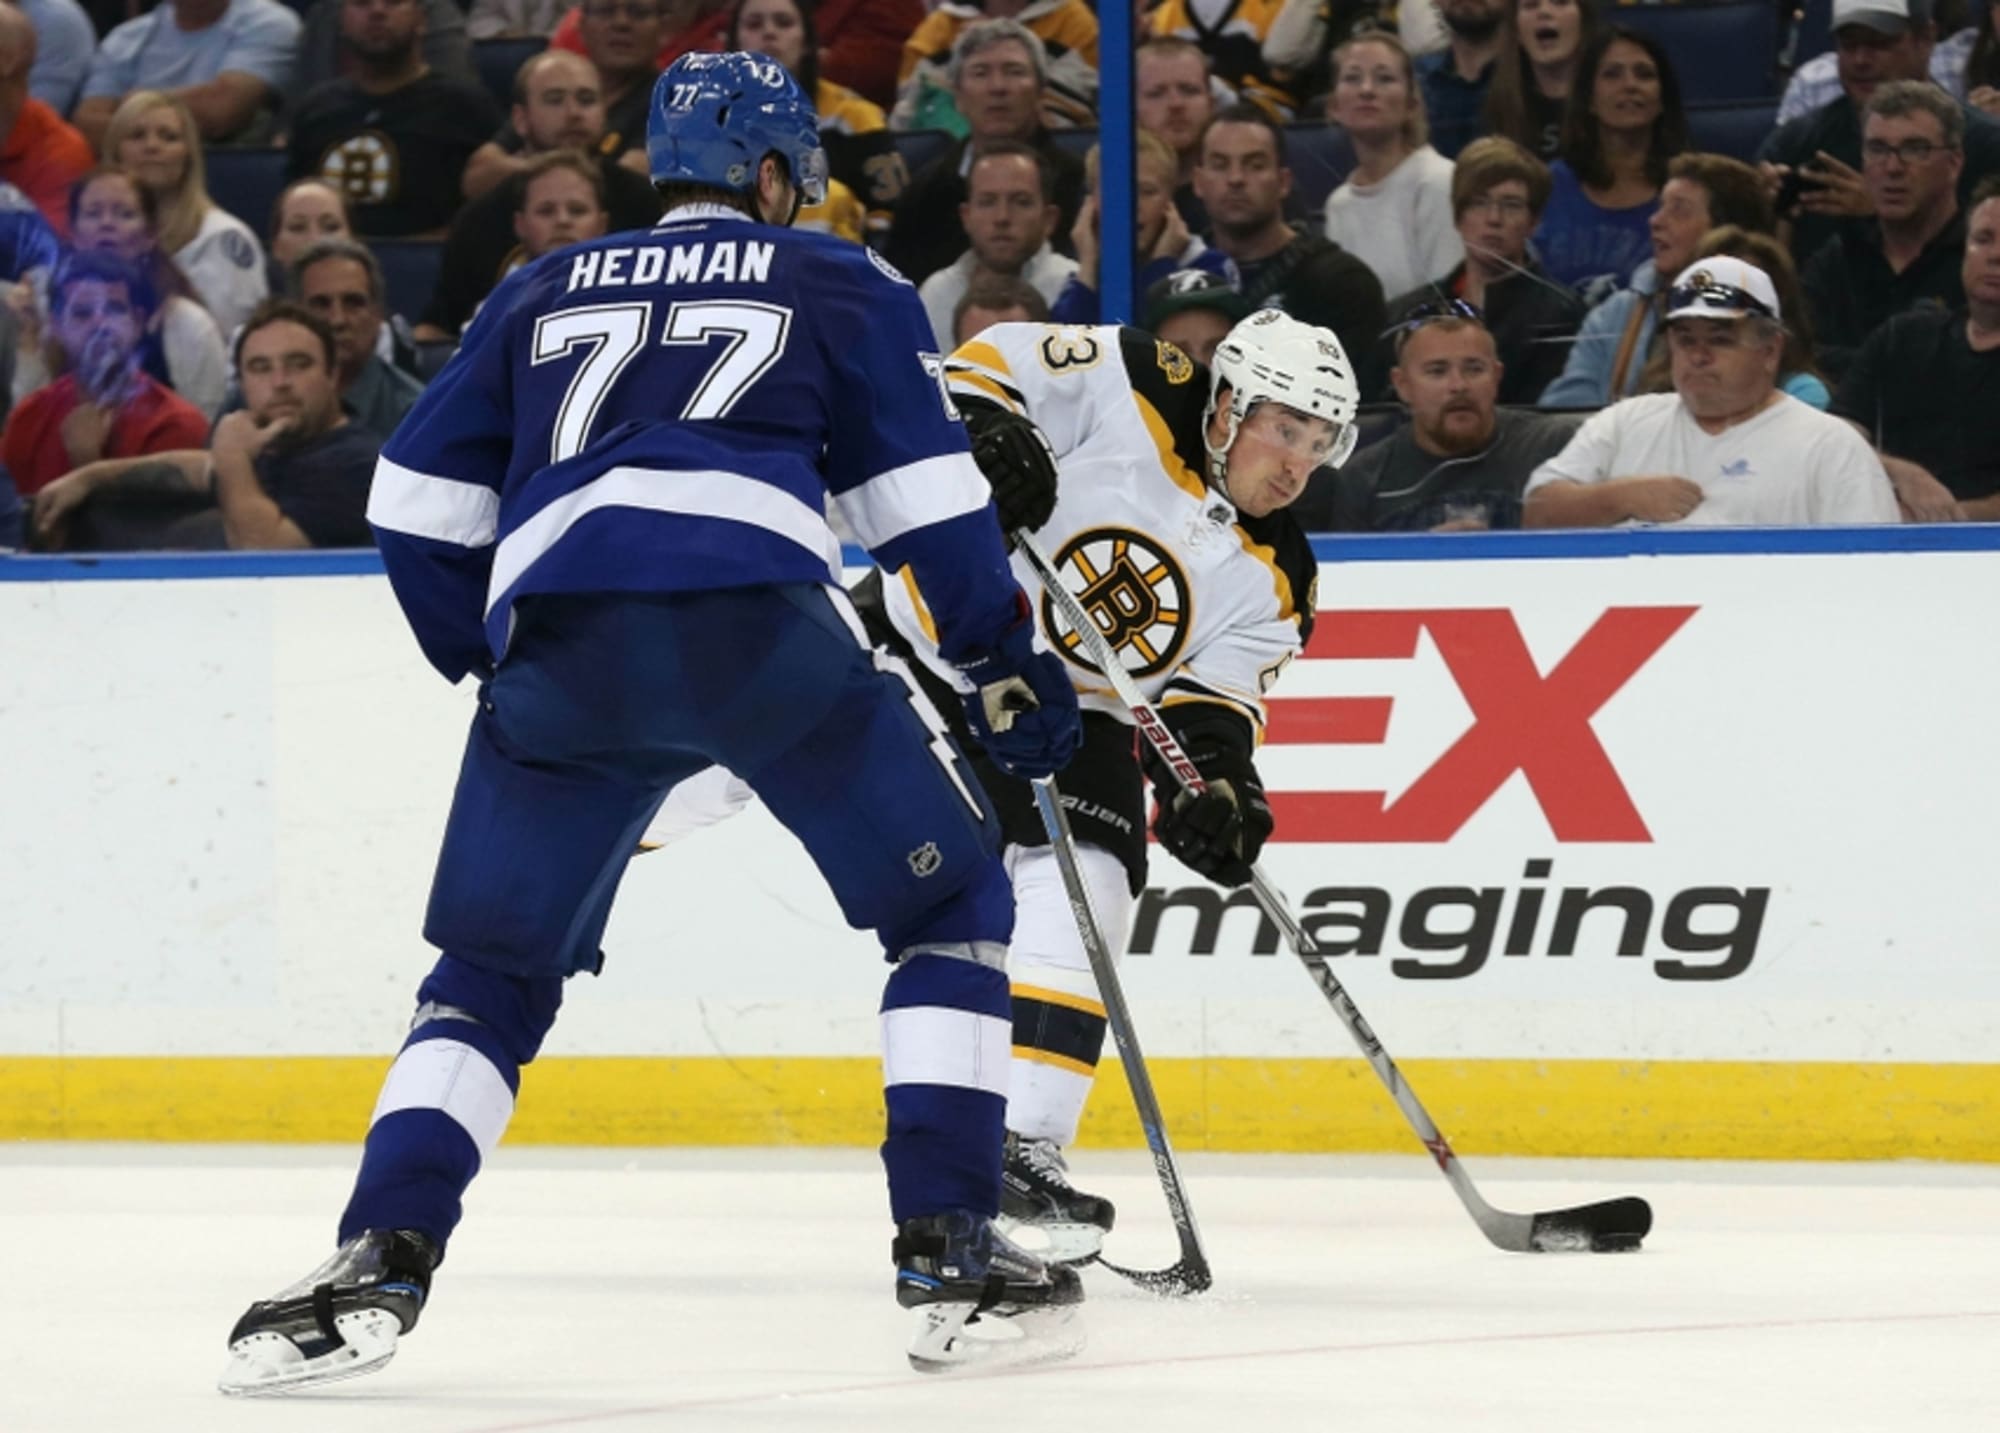 Happy ending for Jonathan Drouin and Lightning was too much to